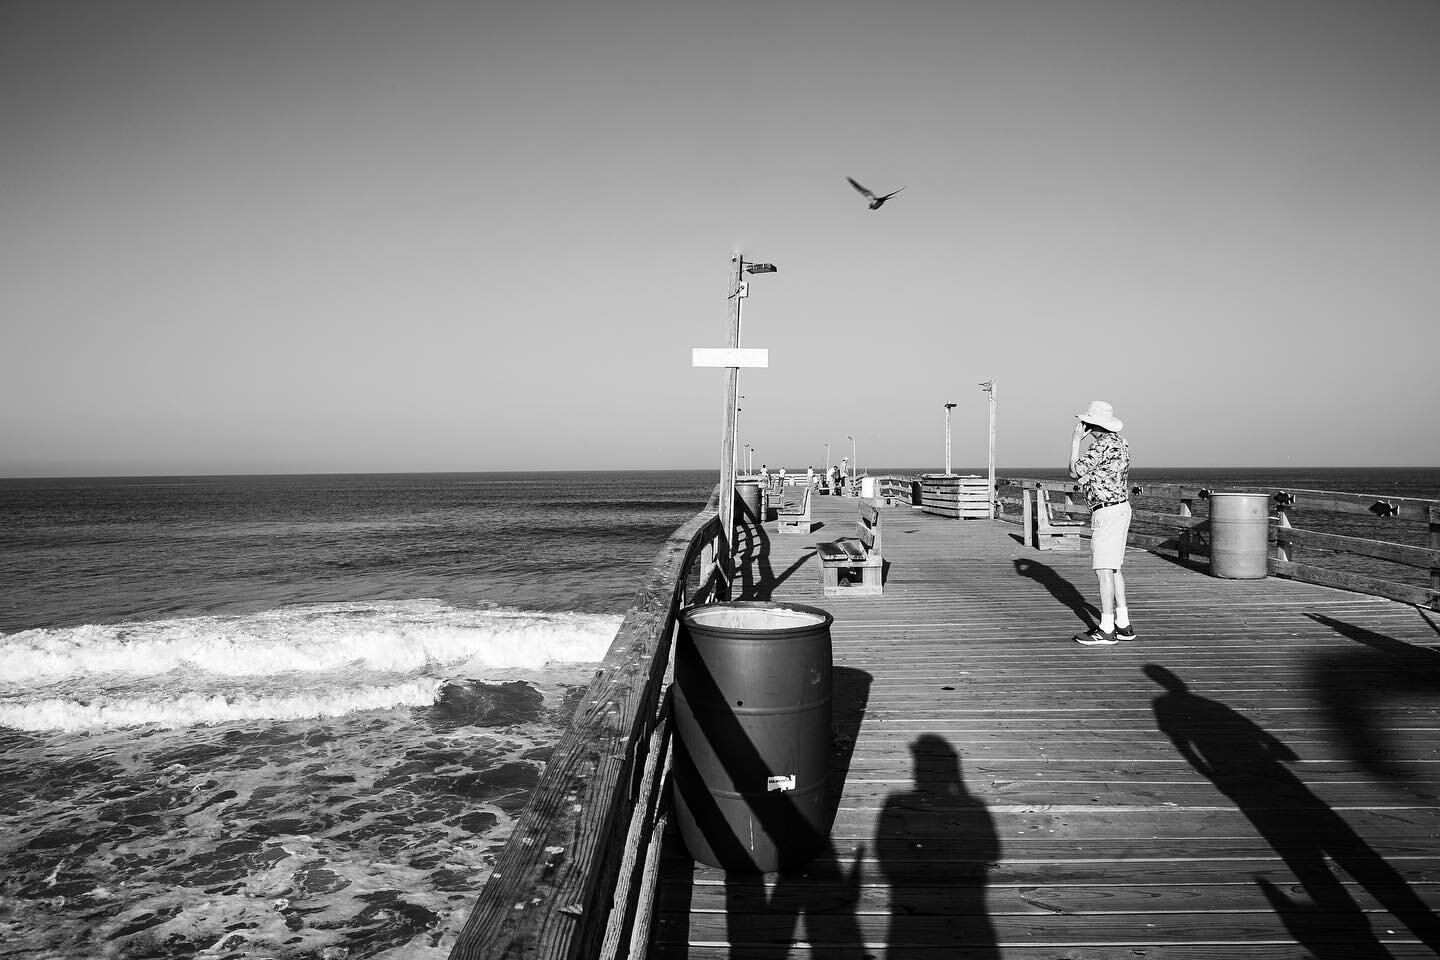 Avalon Pier again. Because it's that fucking timeless &amp; cool! Don't expect me to stop now, I could go on forever. .
.
.
#apakmedia #avalonpier #obxnc #seagullspotting #blackandwhitephotography #worldsbestbeaches #nofunhere #seahags #arcade #fucky